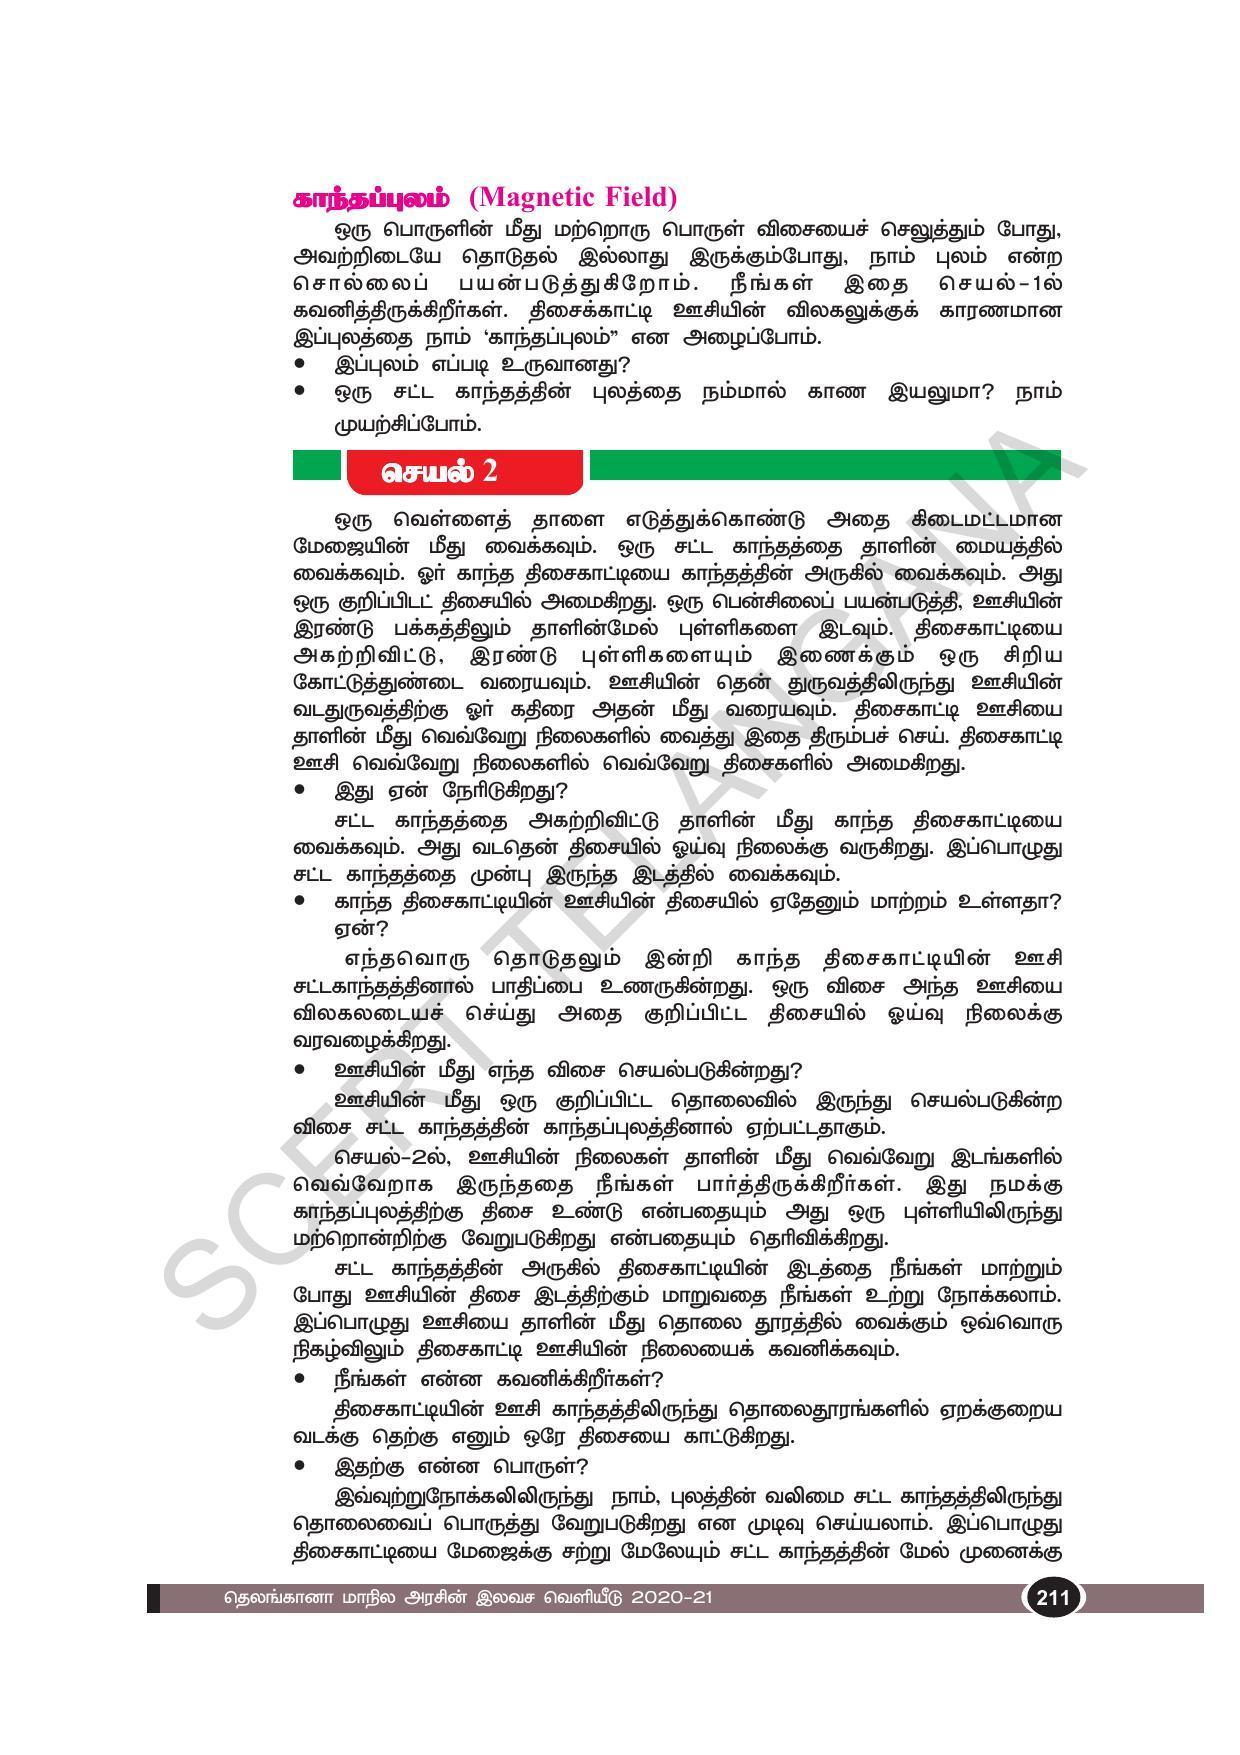 TS SCERT Class 10 Physical Science(Tamil Medium) Text Book - Page 223